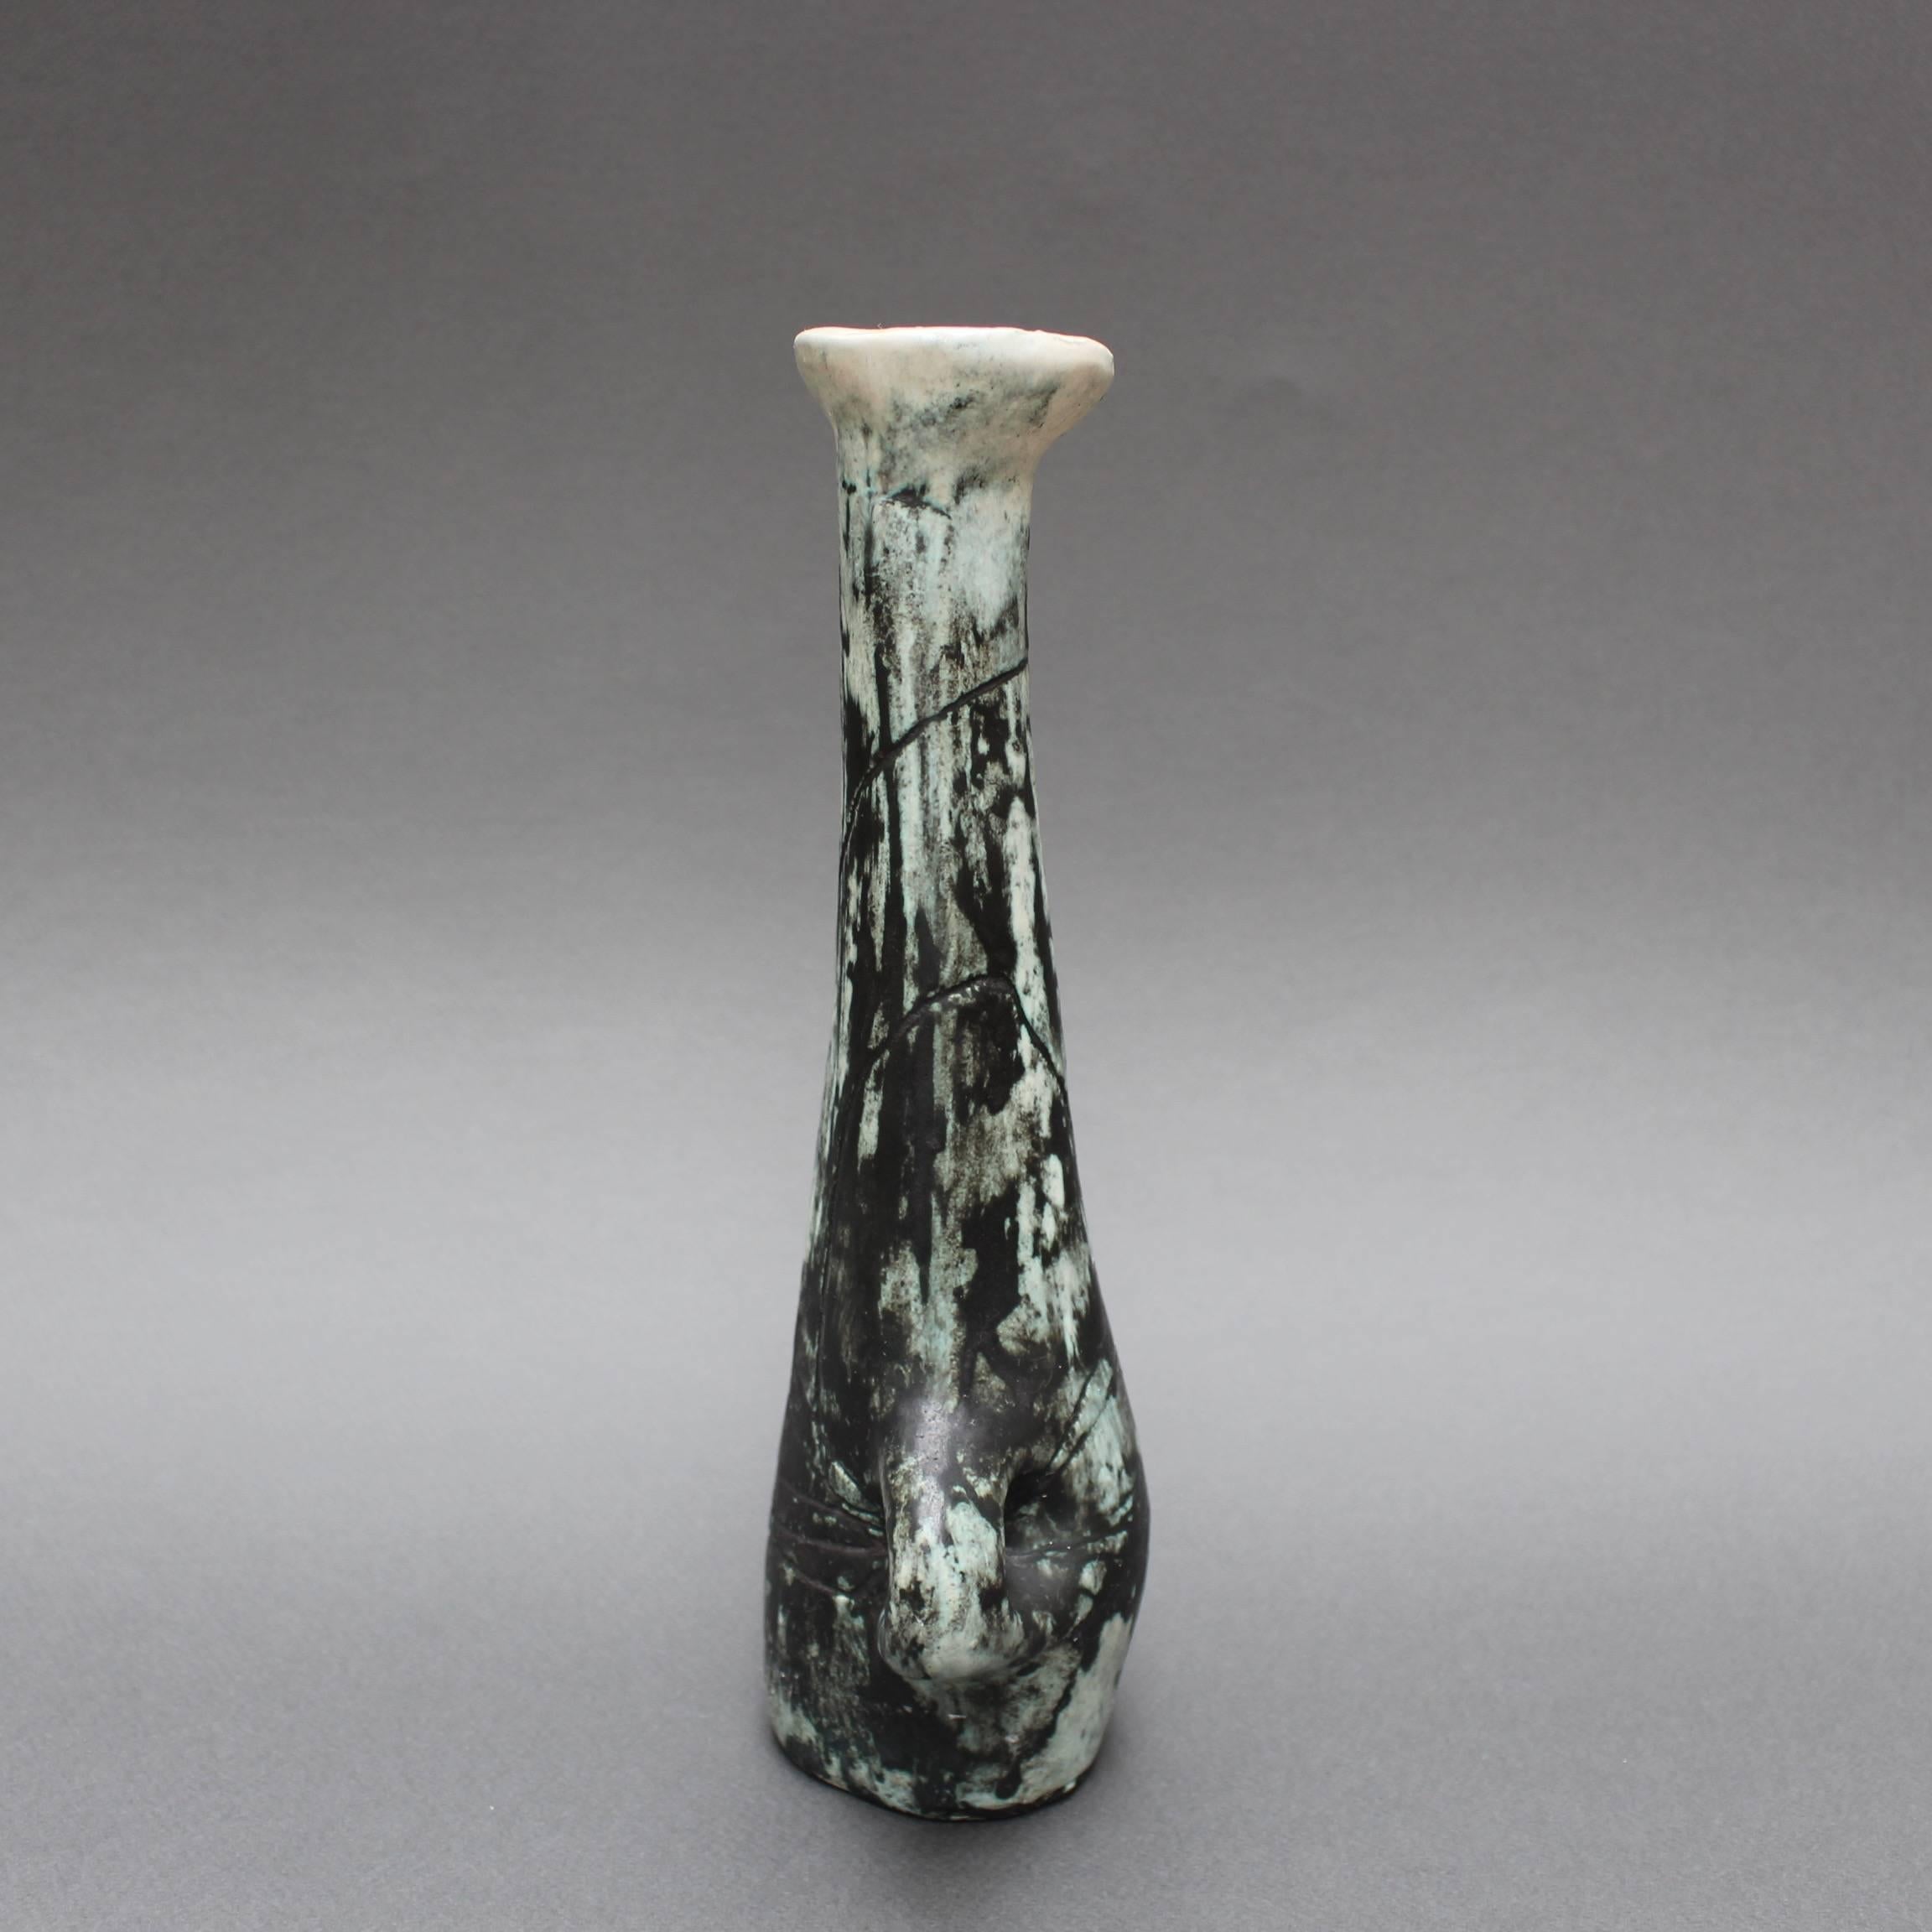 French Long-Necked Earthenware Liqueur Bottle with Handle by Jacques Blin, circa 1950s